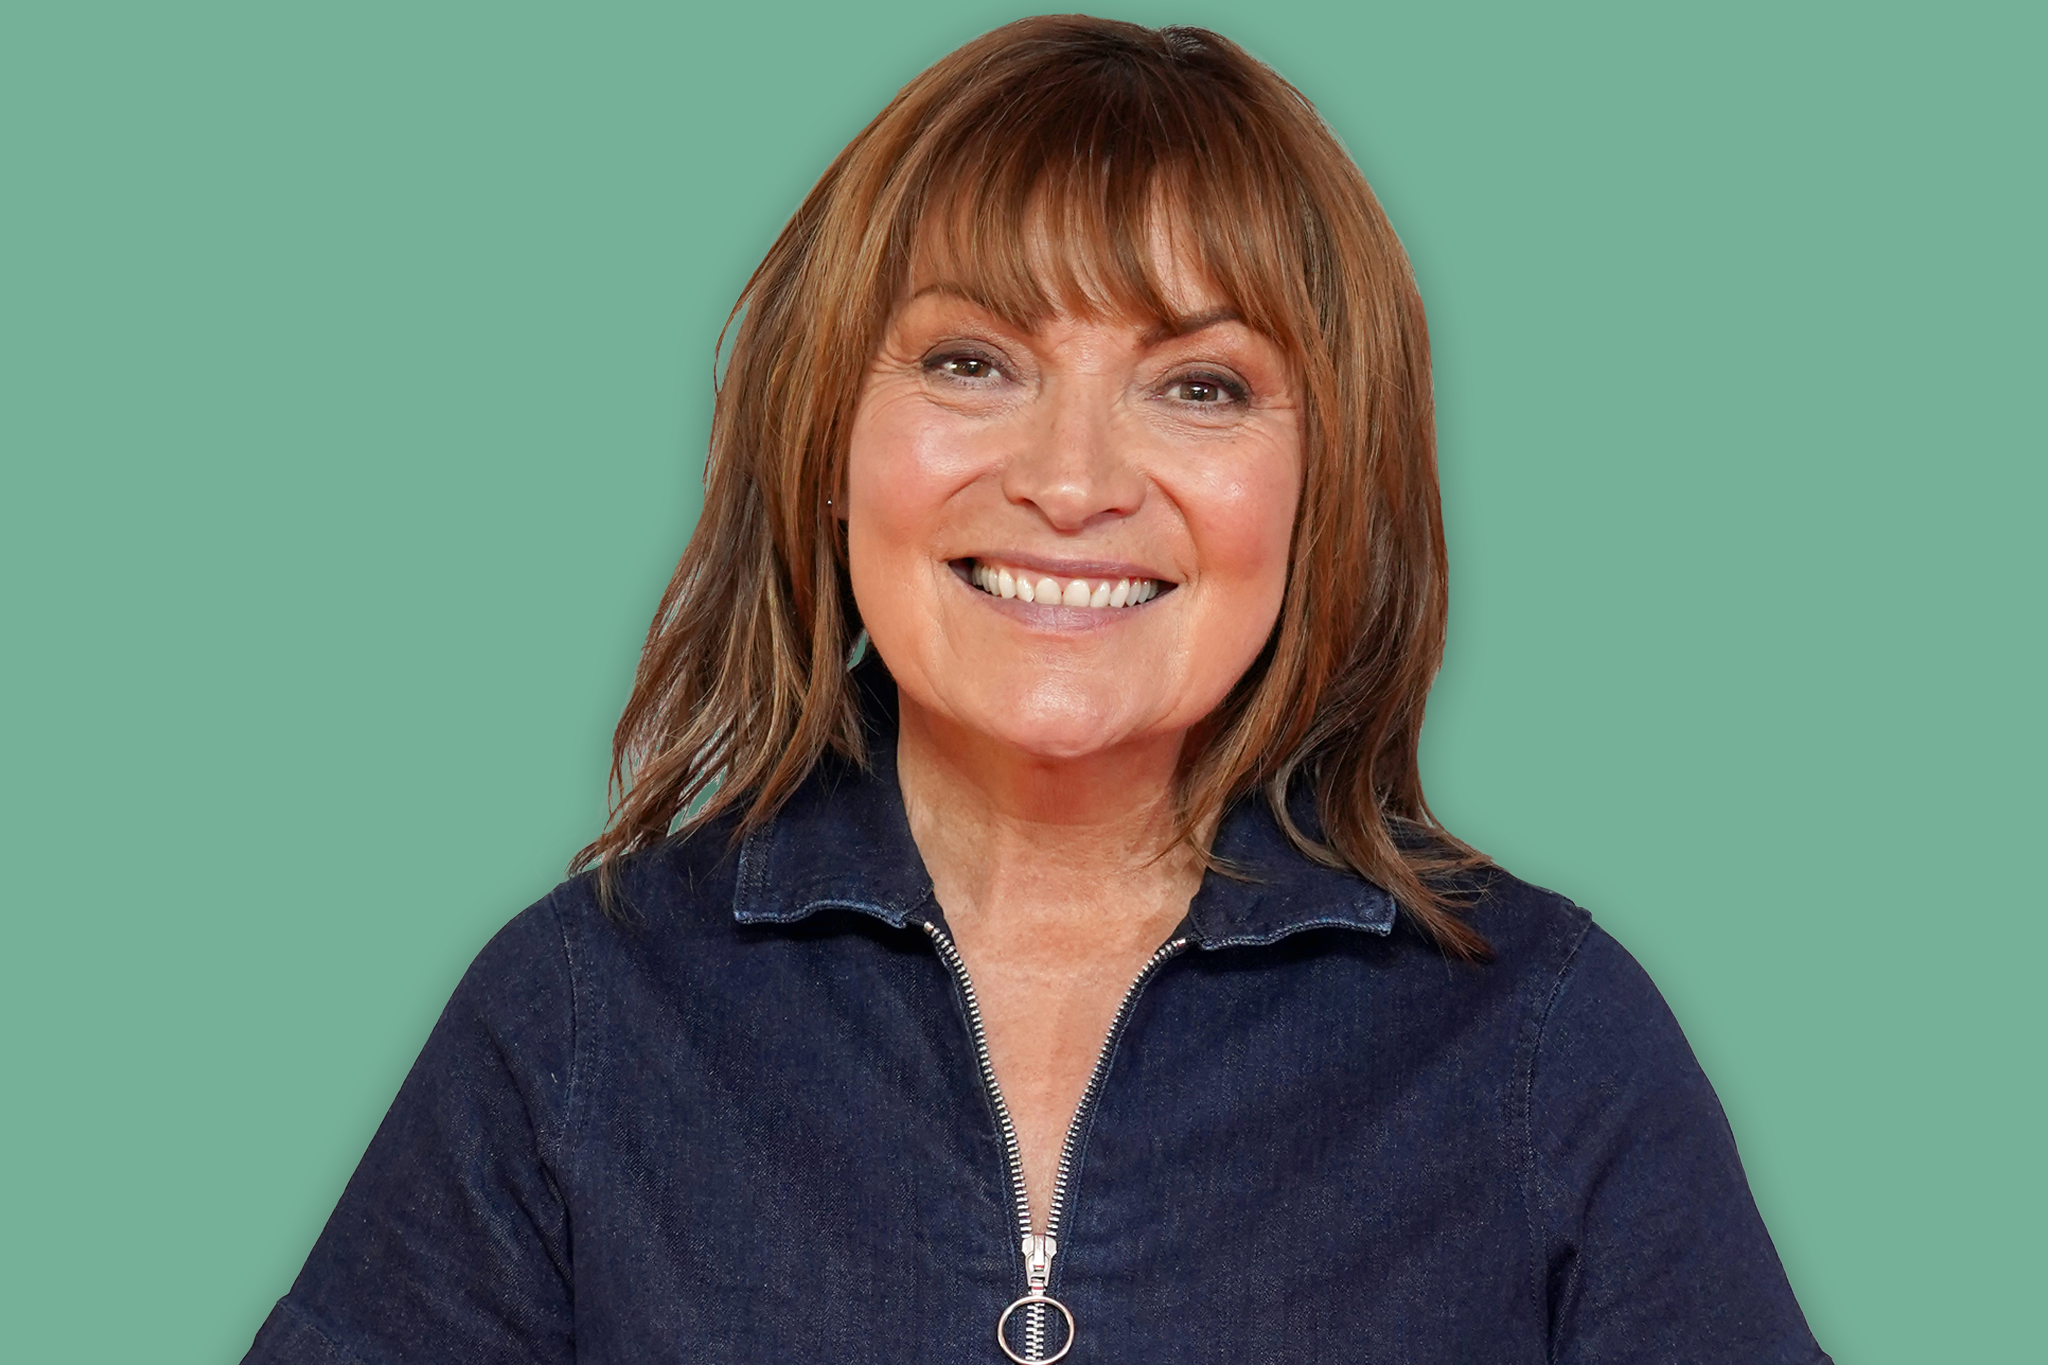 Lorraine Kelly’s mix of steeliness and everywoman warmth sets her apart from other presenters